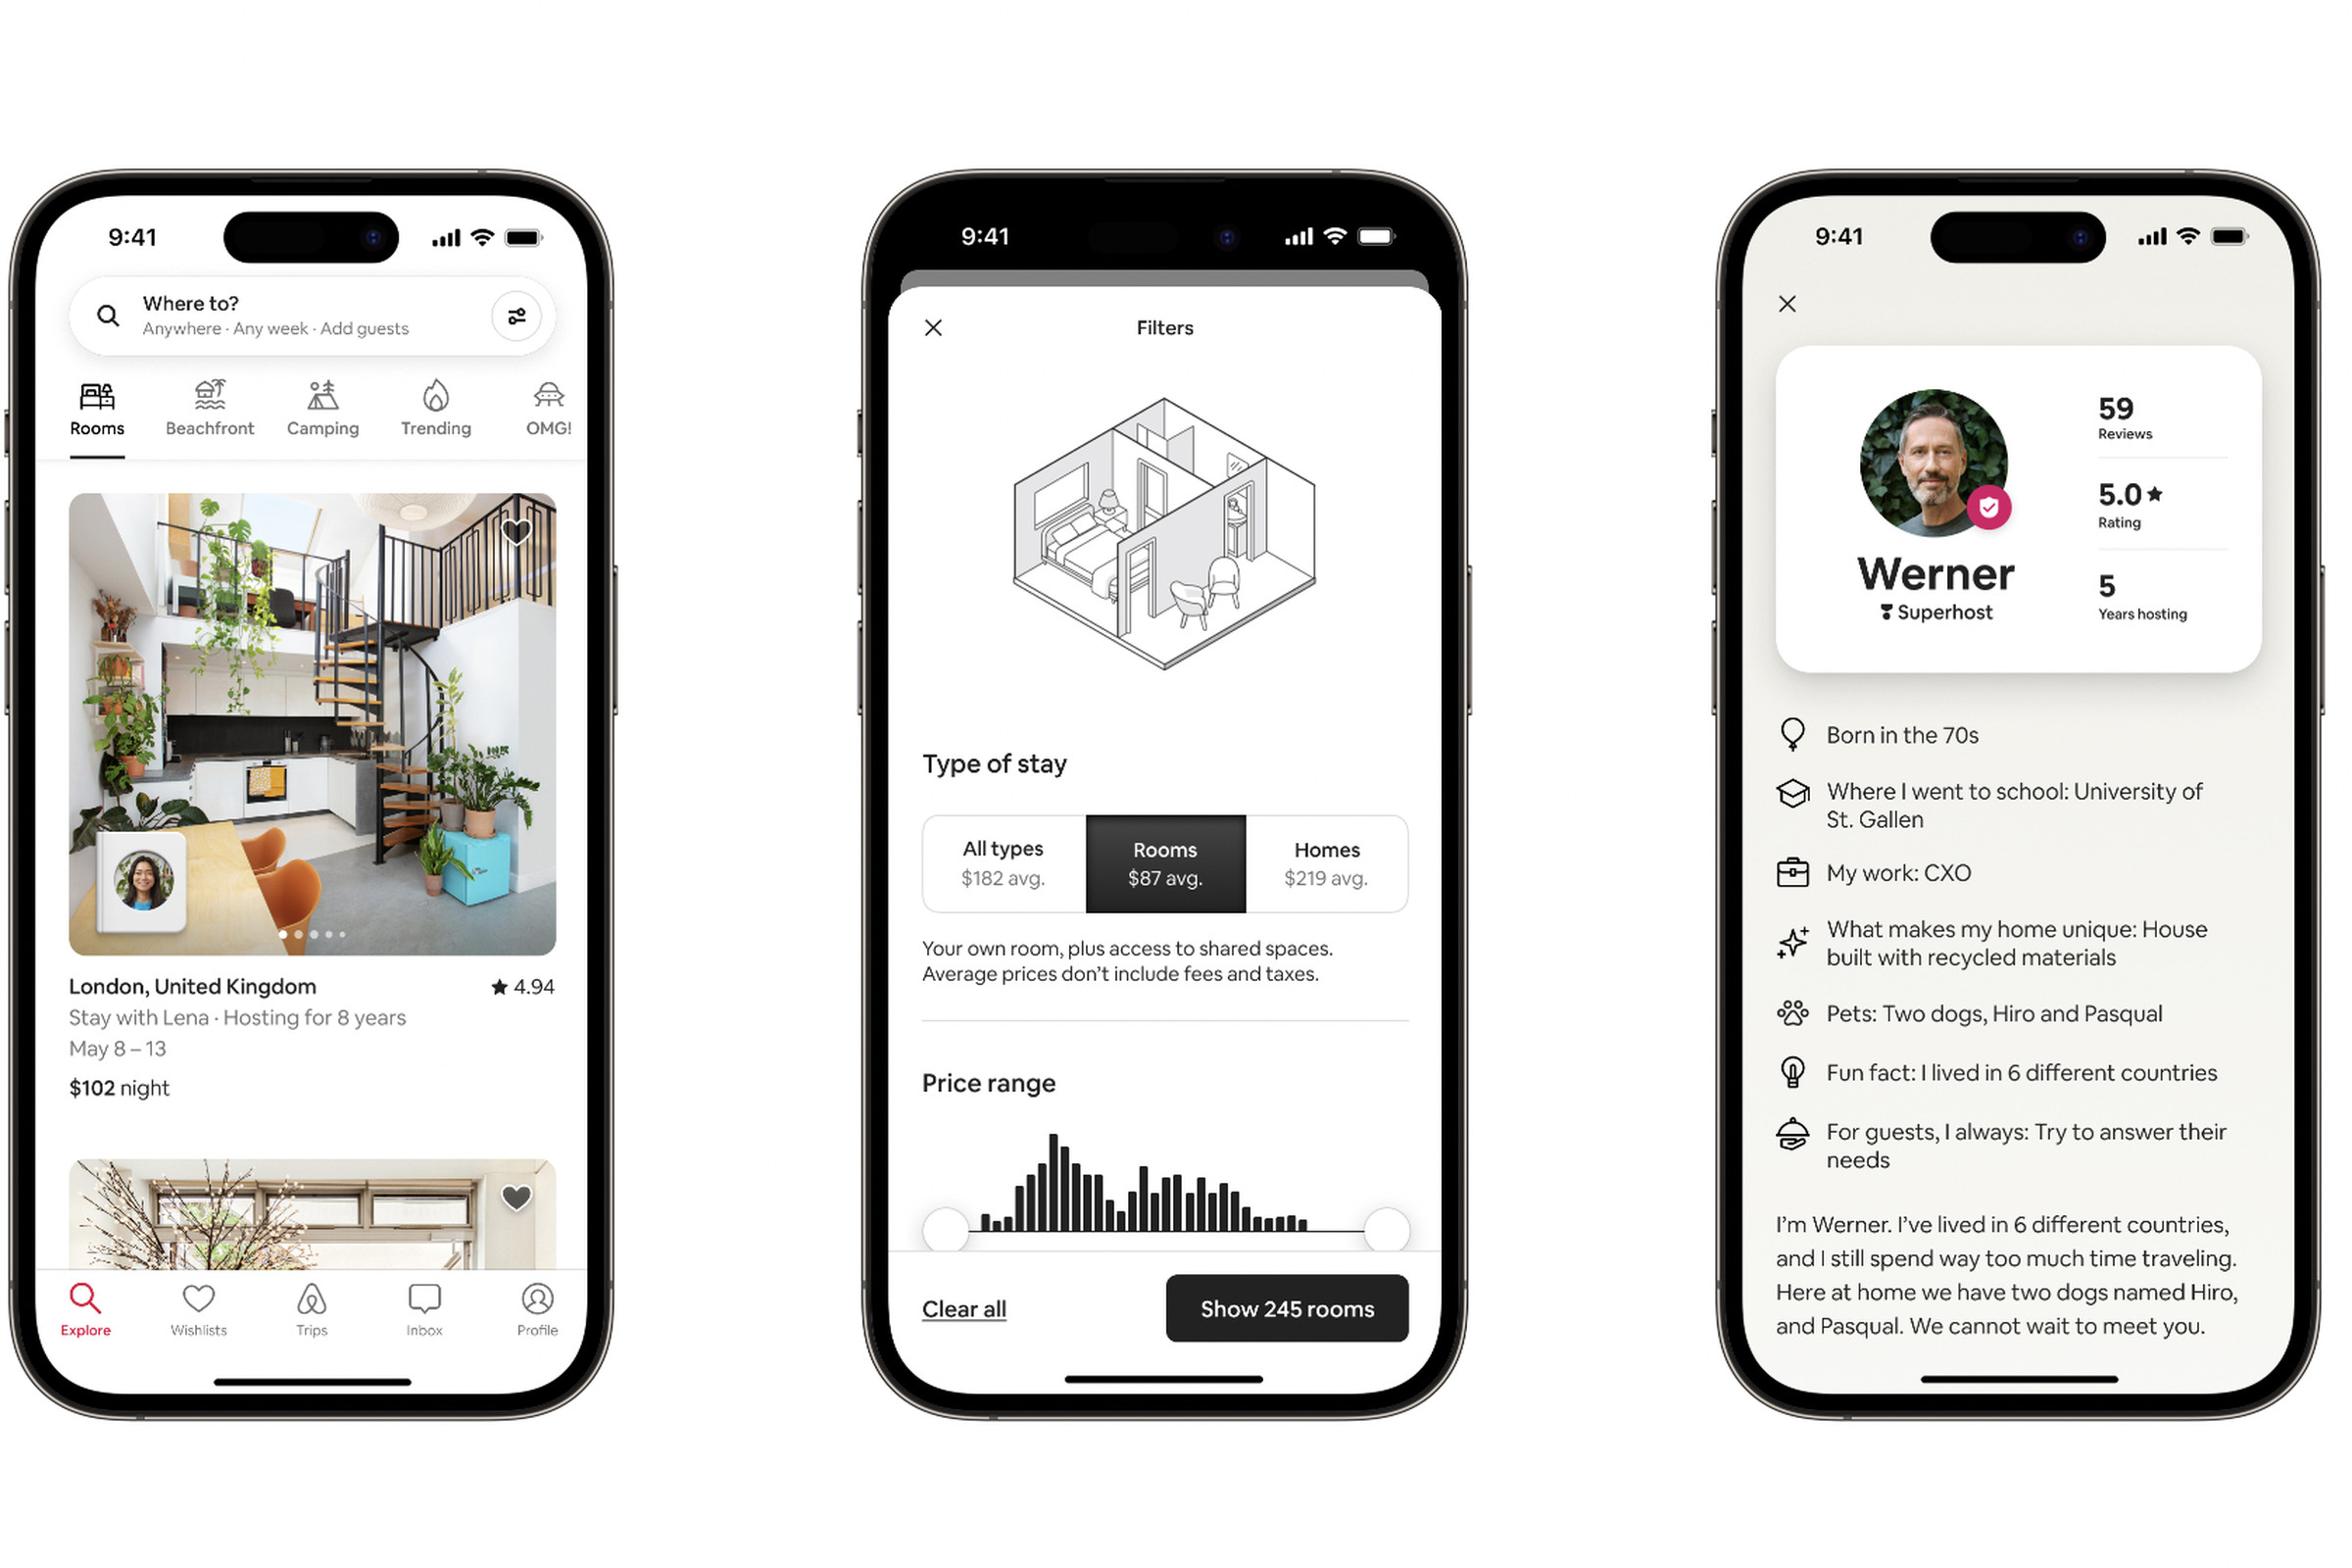 An image showing three mobile screenshots of Airbnb’s Rooms feature